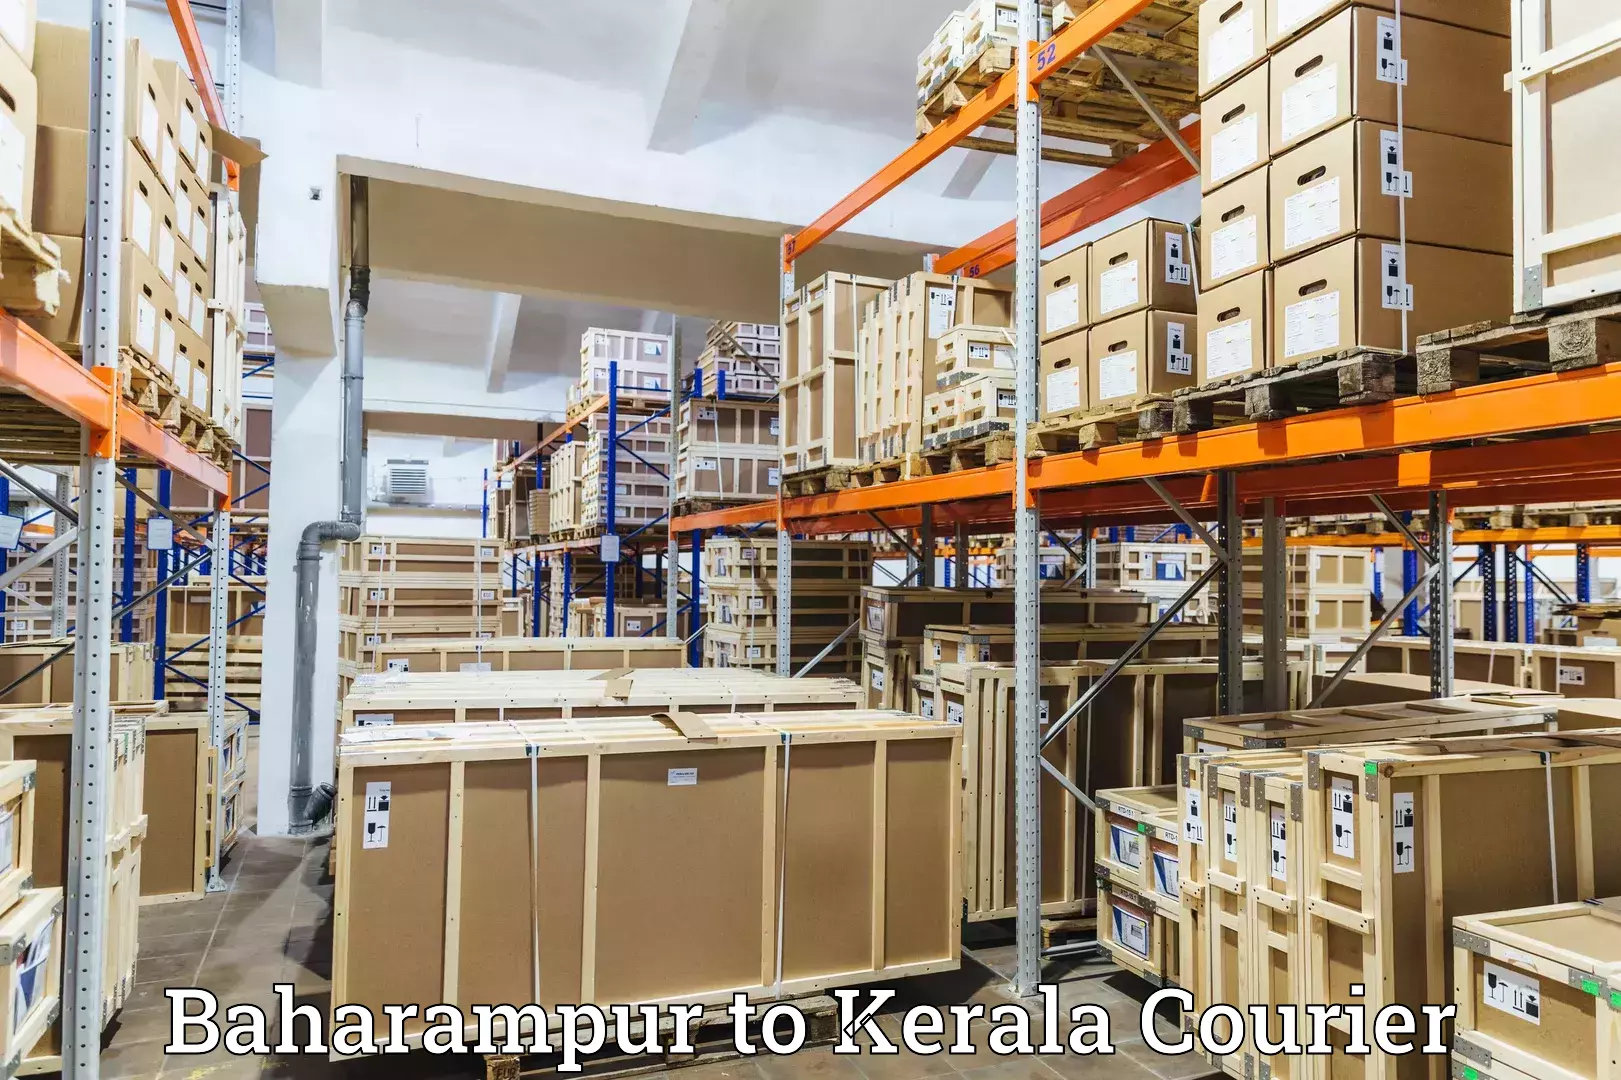 Reliable delivery network Baharampur to Kottayam